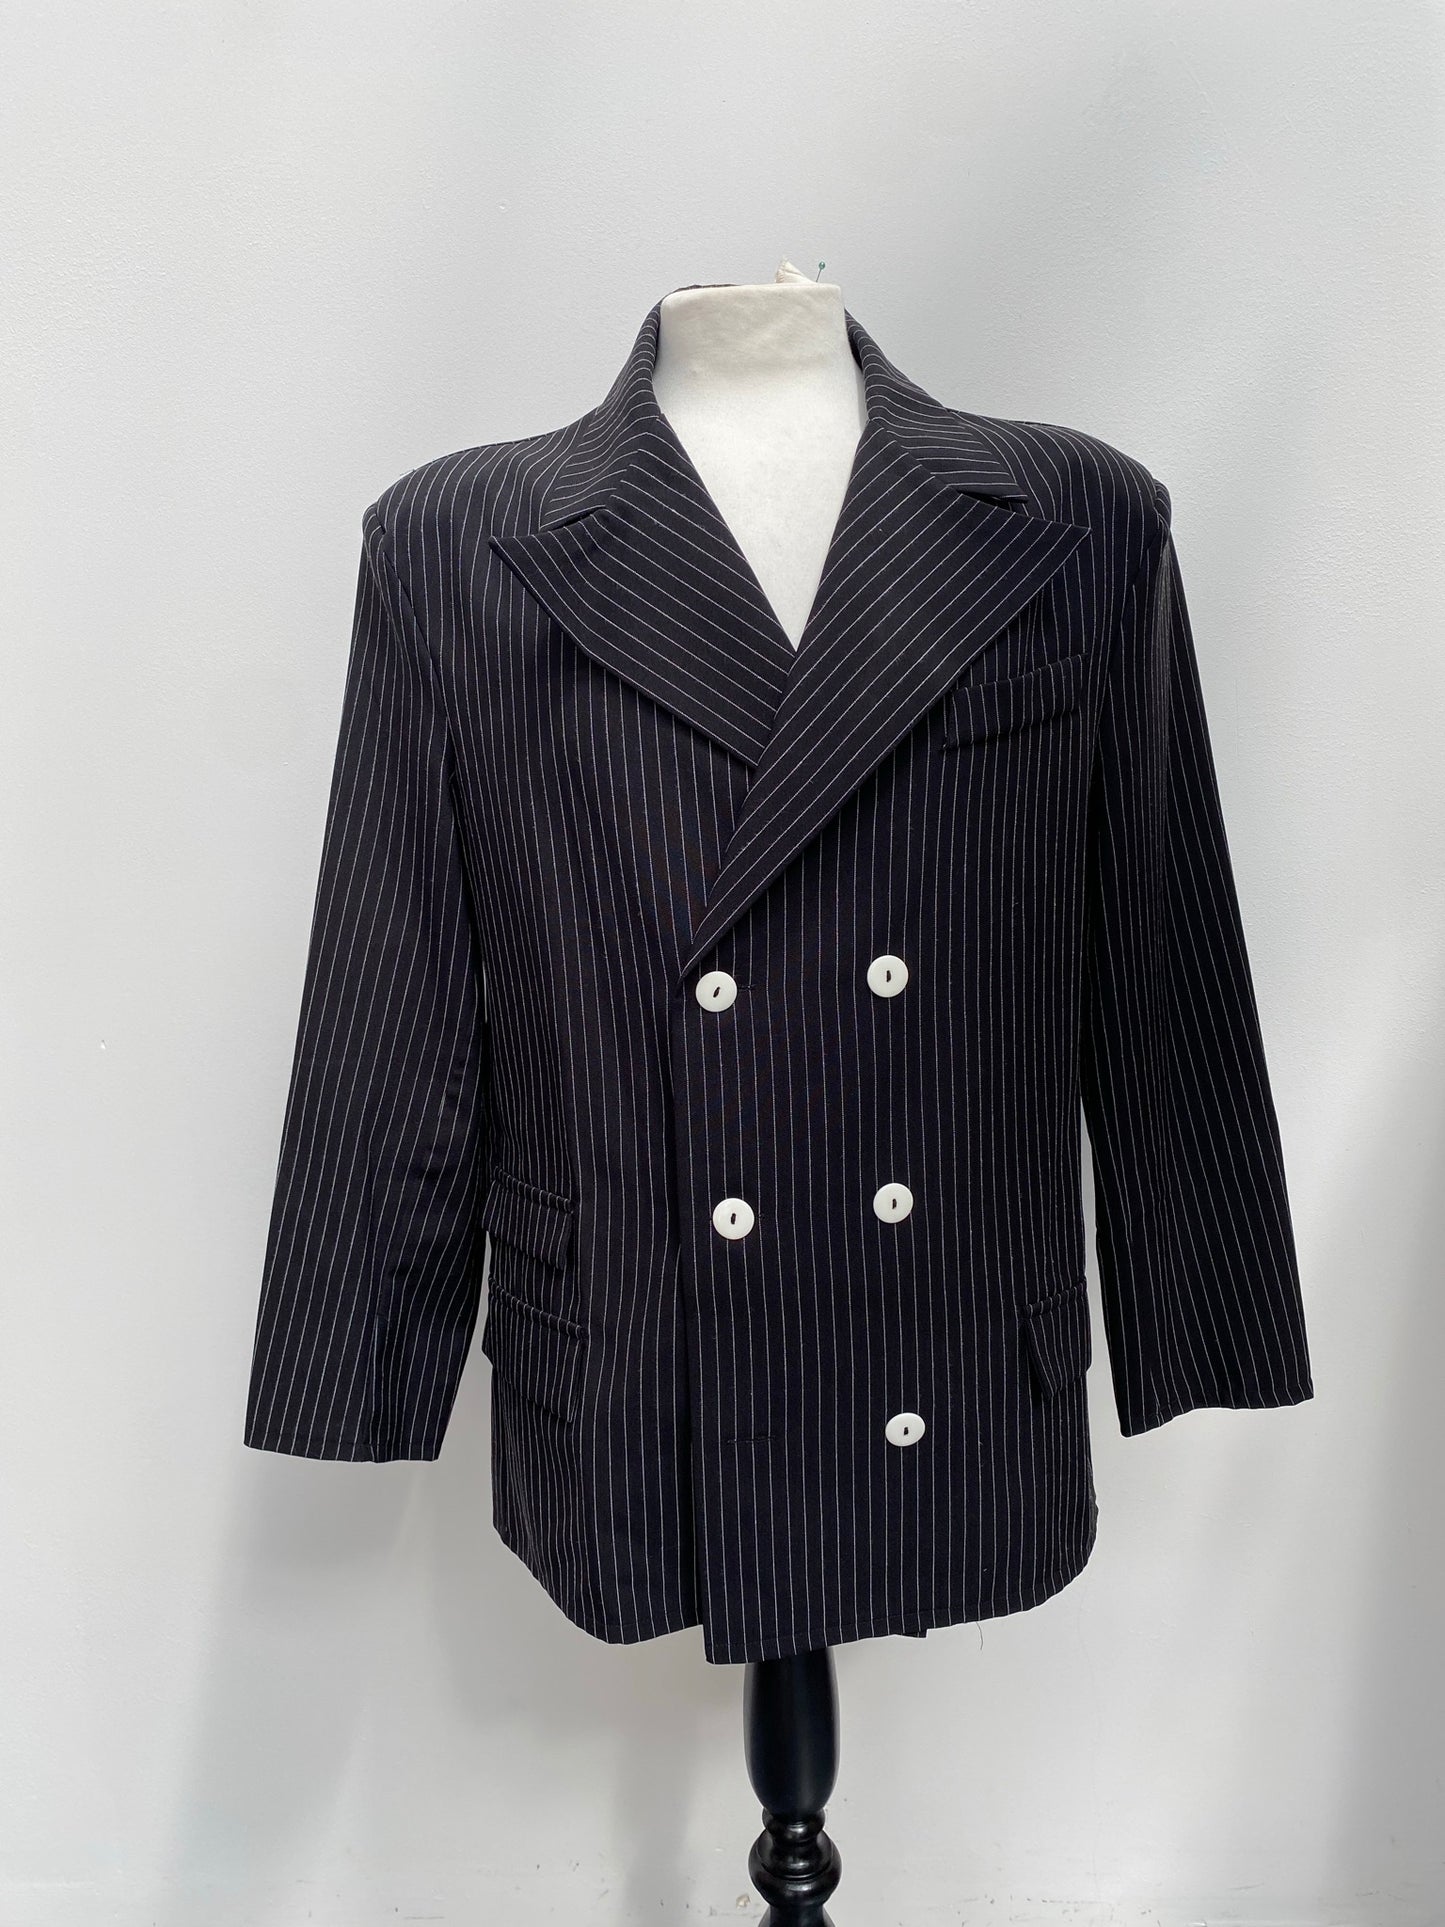 1920s Style Black Pinstripe Gangster Suit with Braces - Ex Hire Fancy Dress Costumes